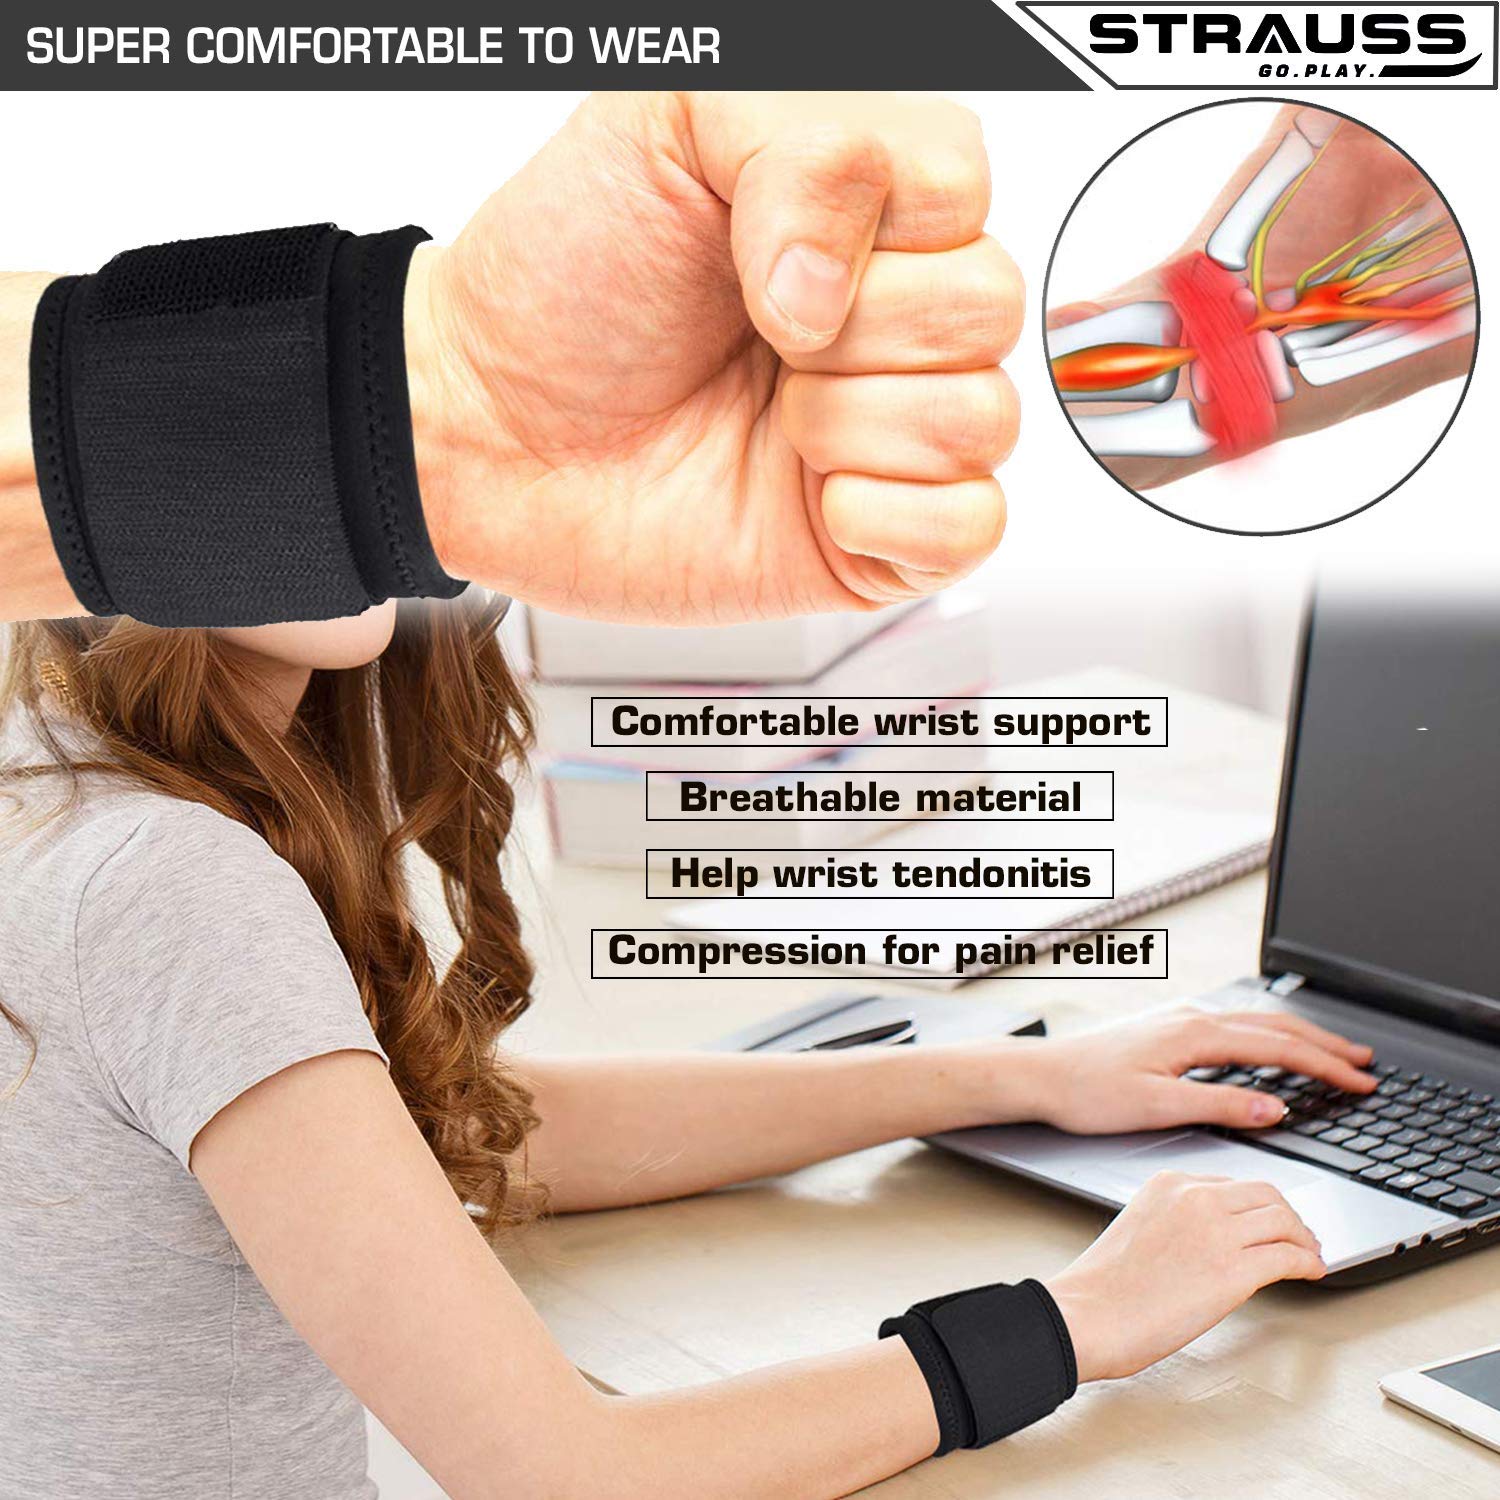 Strauss Adjustable Knee Support, Free Size (Black) and Wrist Support, Free Size (Black)